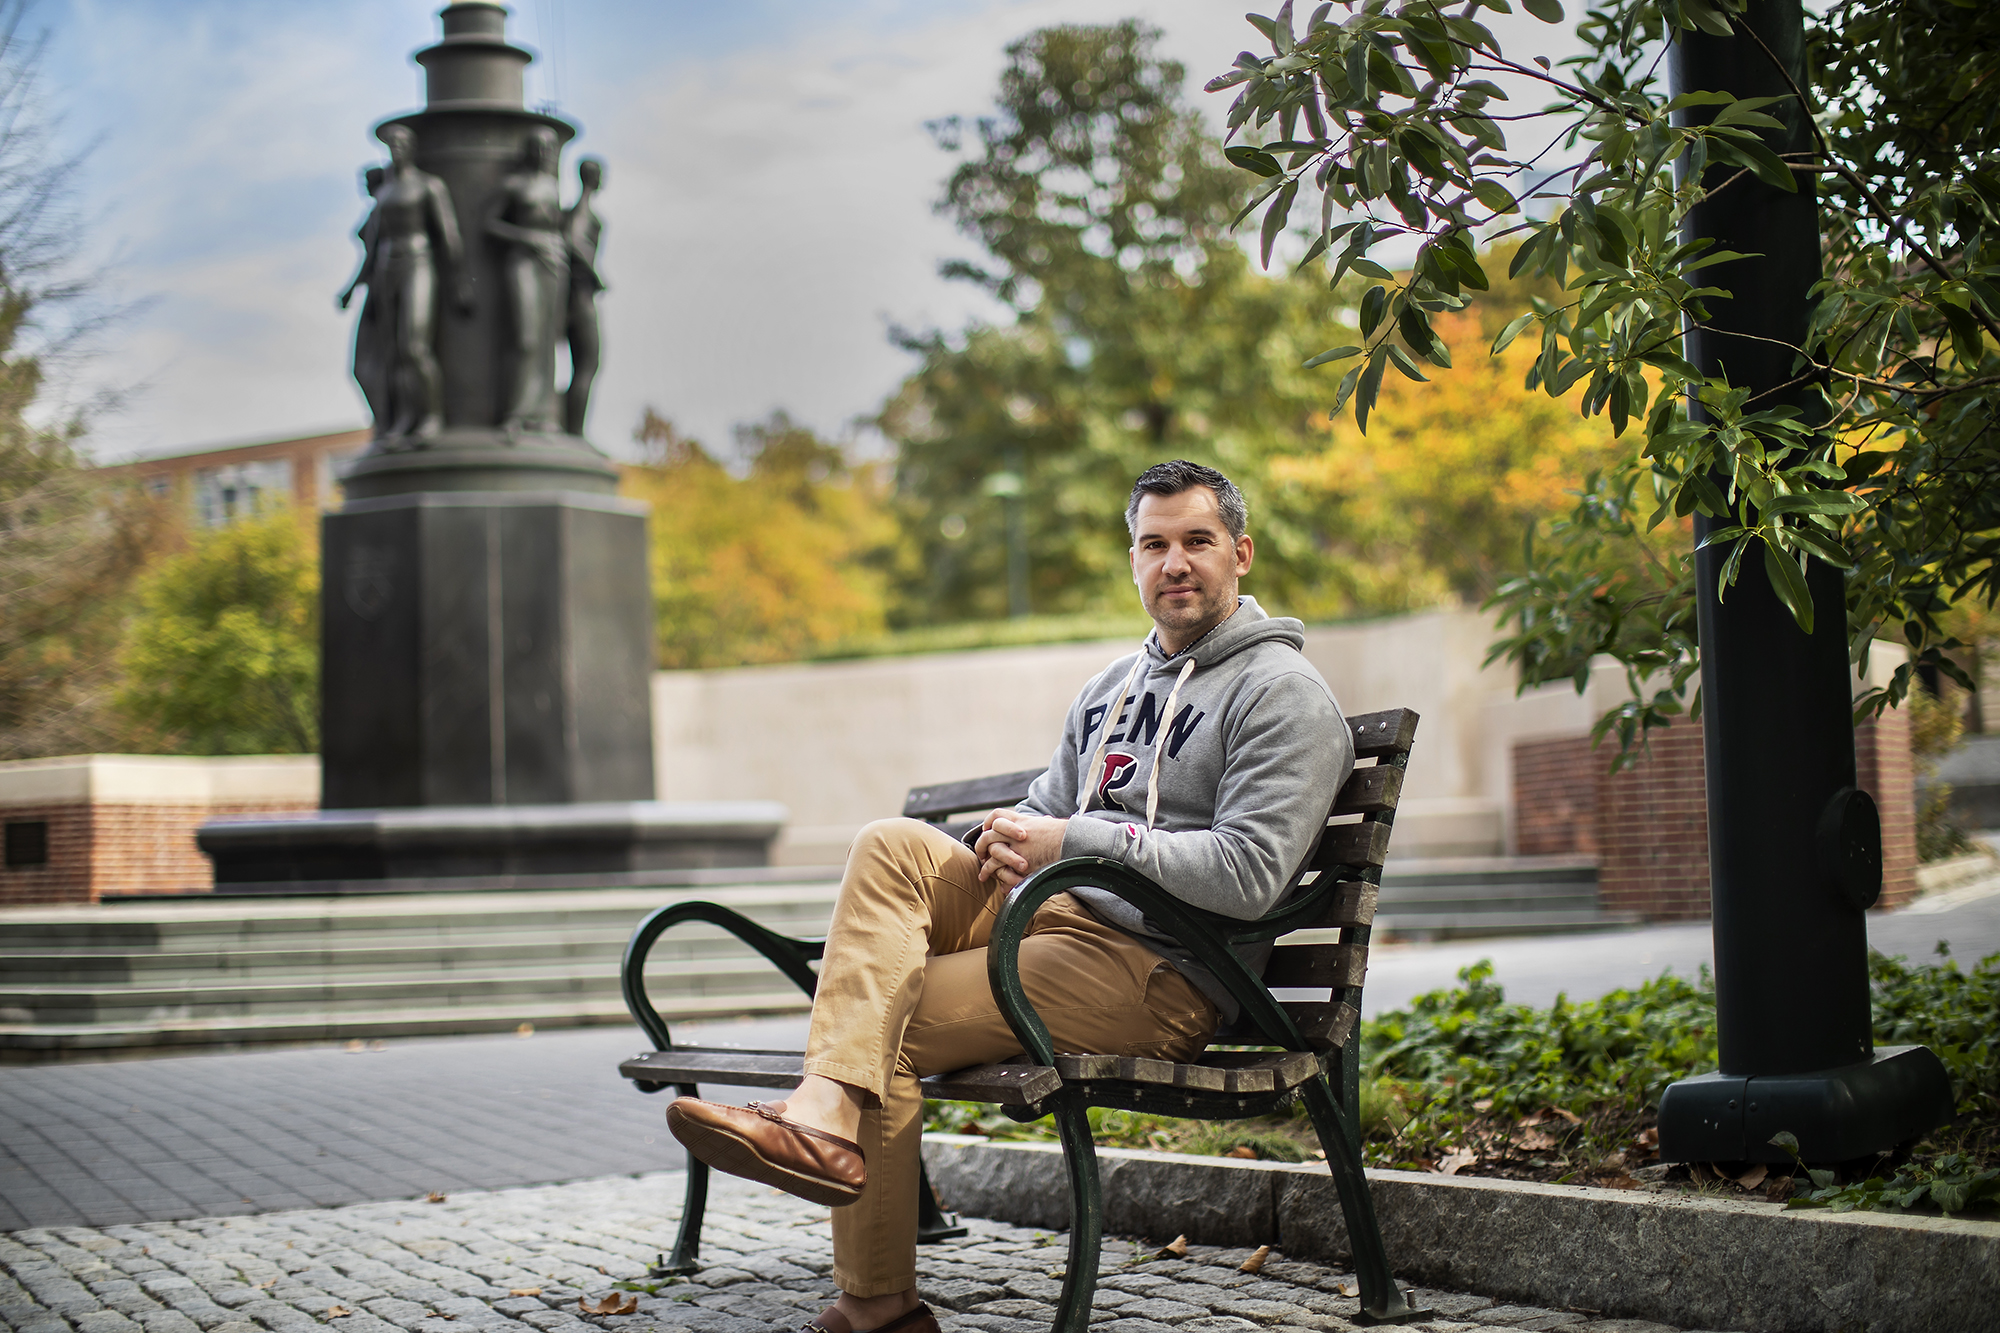 Greg Lutmann sits on a bench in on campus near a statue.